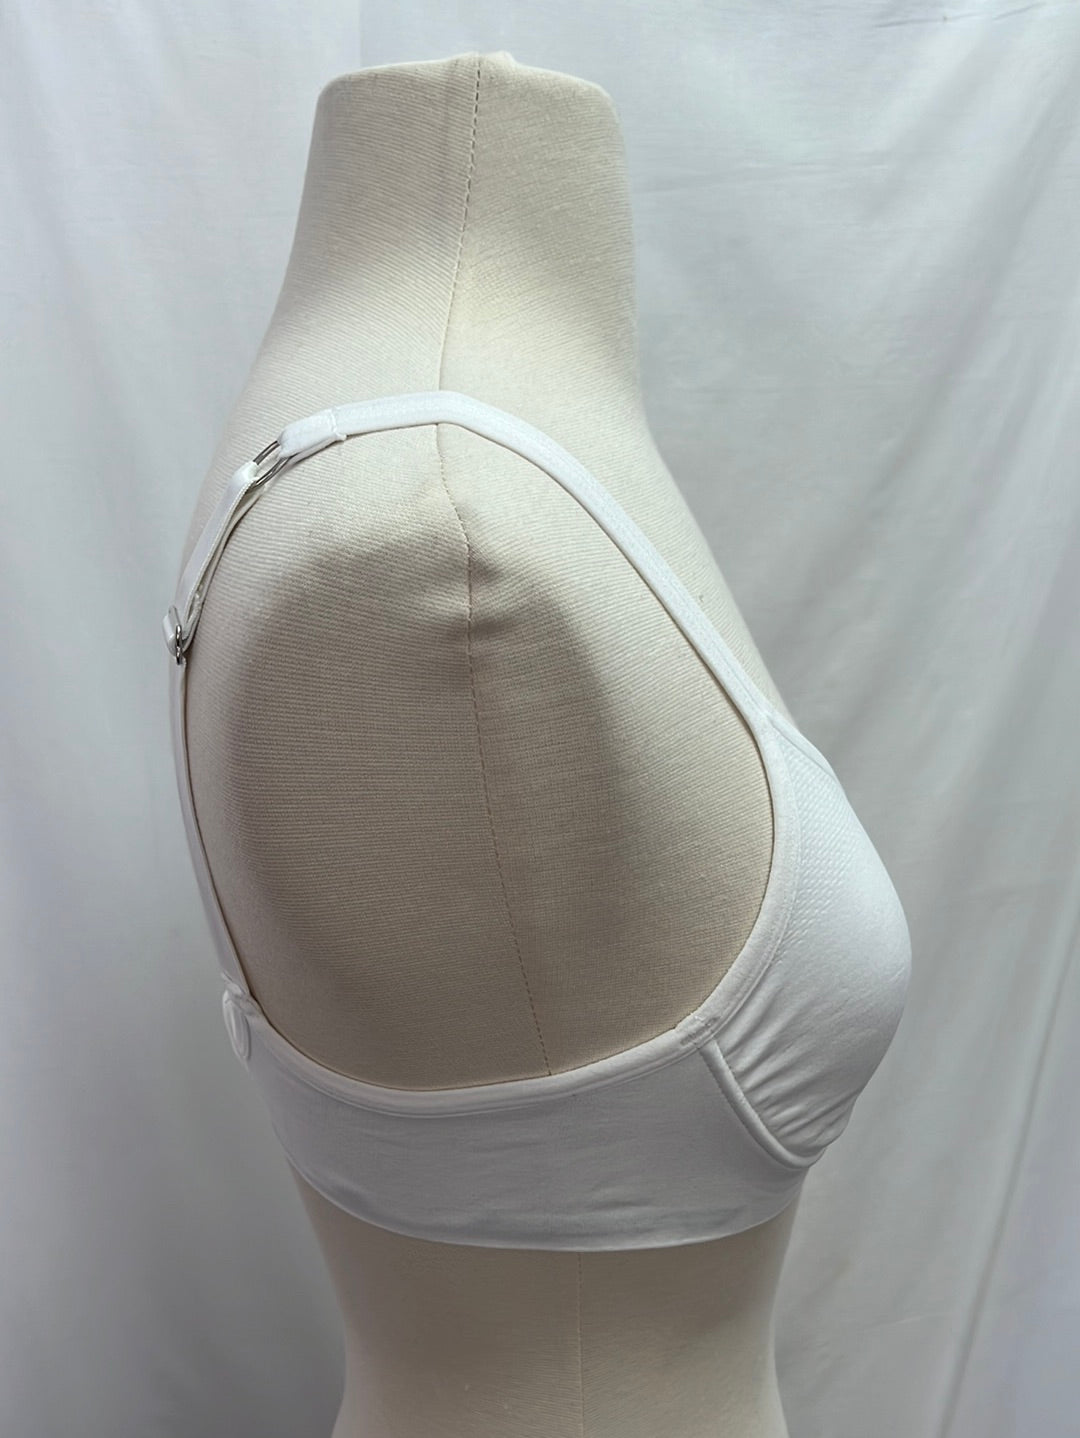 NIP -- ISIS Seamless White Underwire Bralette with Adjustable Band -- Size M